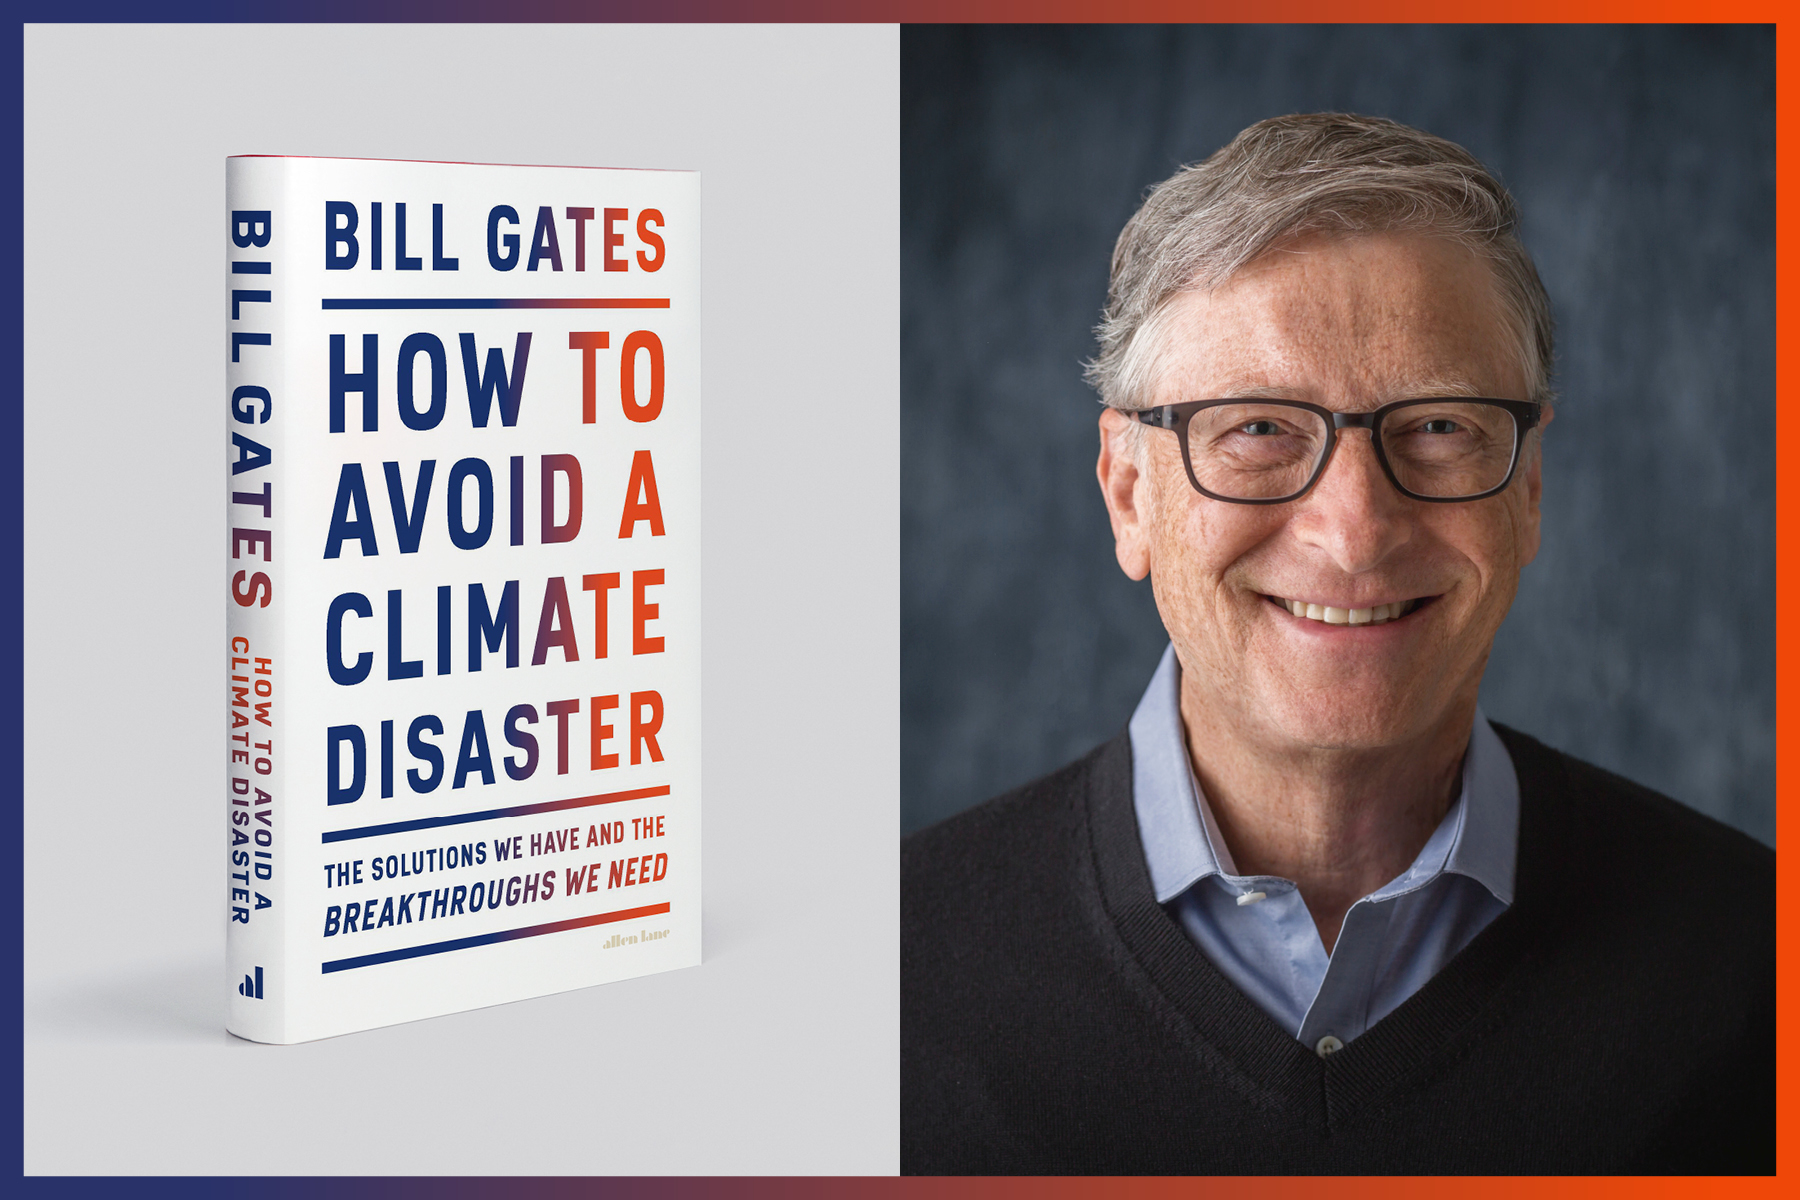 A portrait of Bill Gates side-by-side with the cover of his book